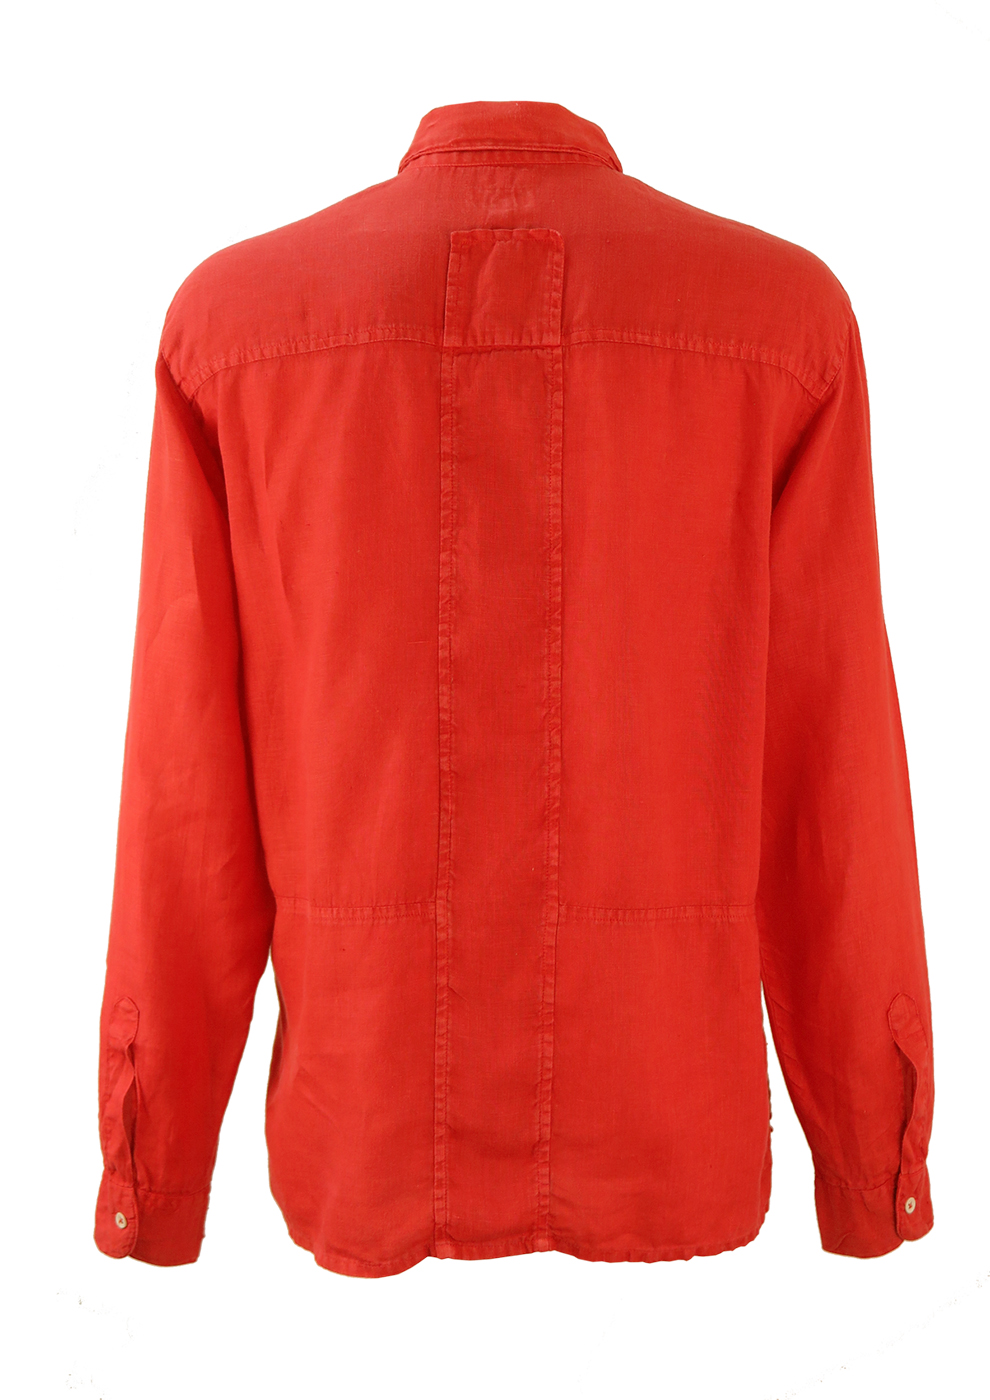 Armani Jeans Red Linen Long Sleeved Shirt with Panel Detail - L/XL ...